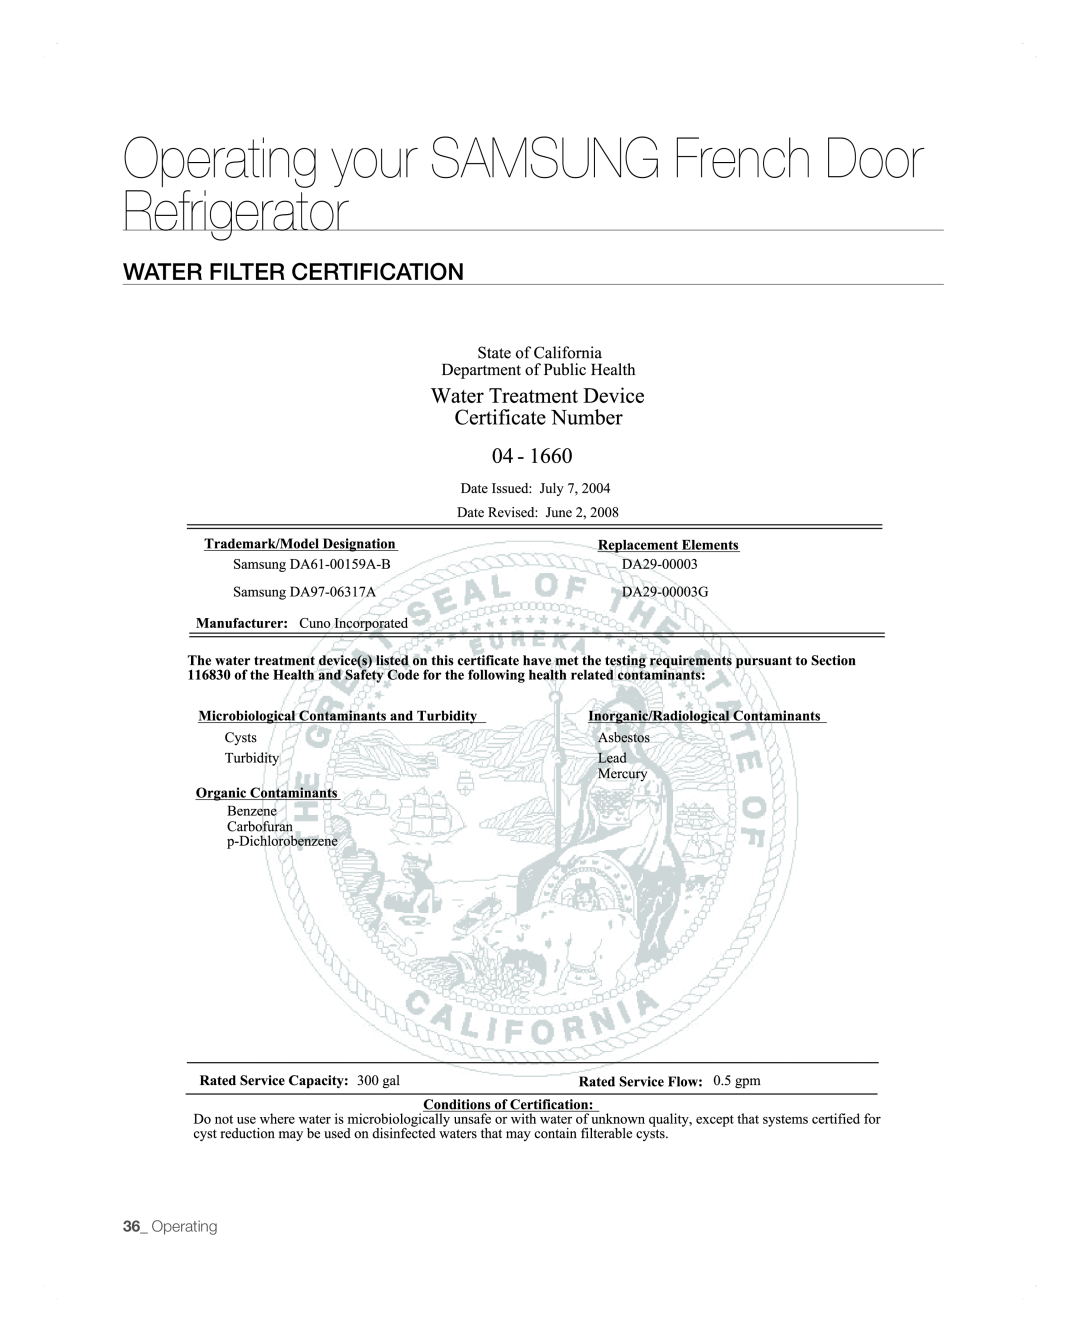 Samsung RFG297AARS user manual Water Filter Certification, Operating your SAMSUNG French Door Refrigerator 